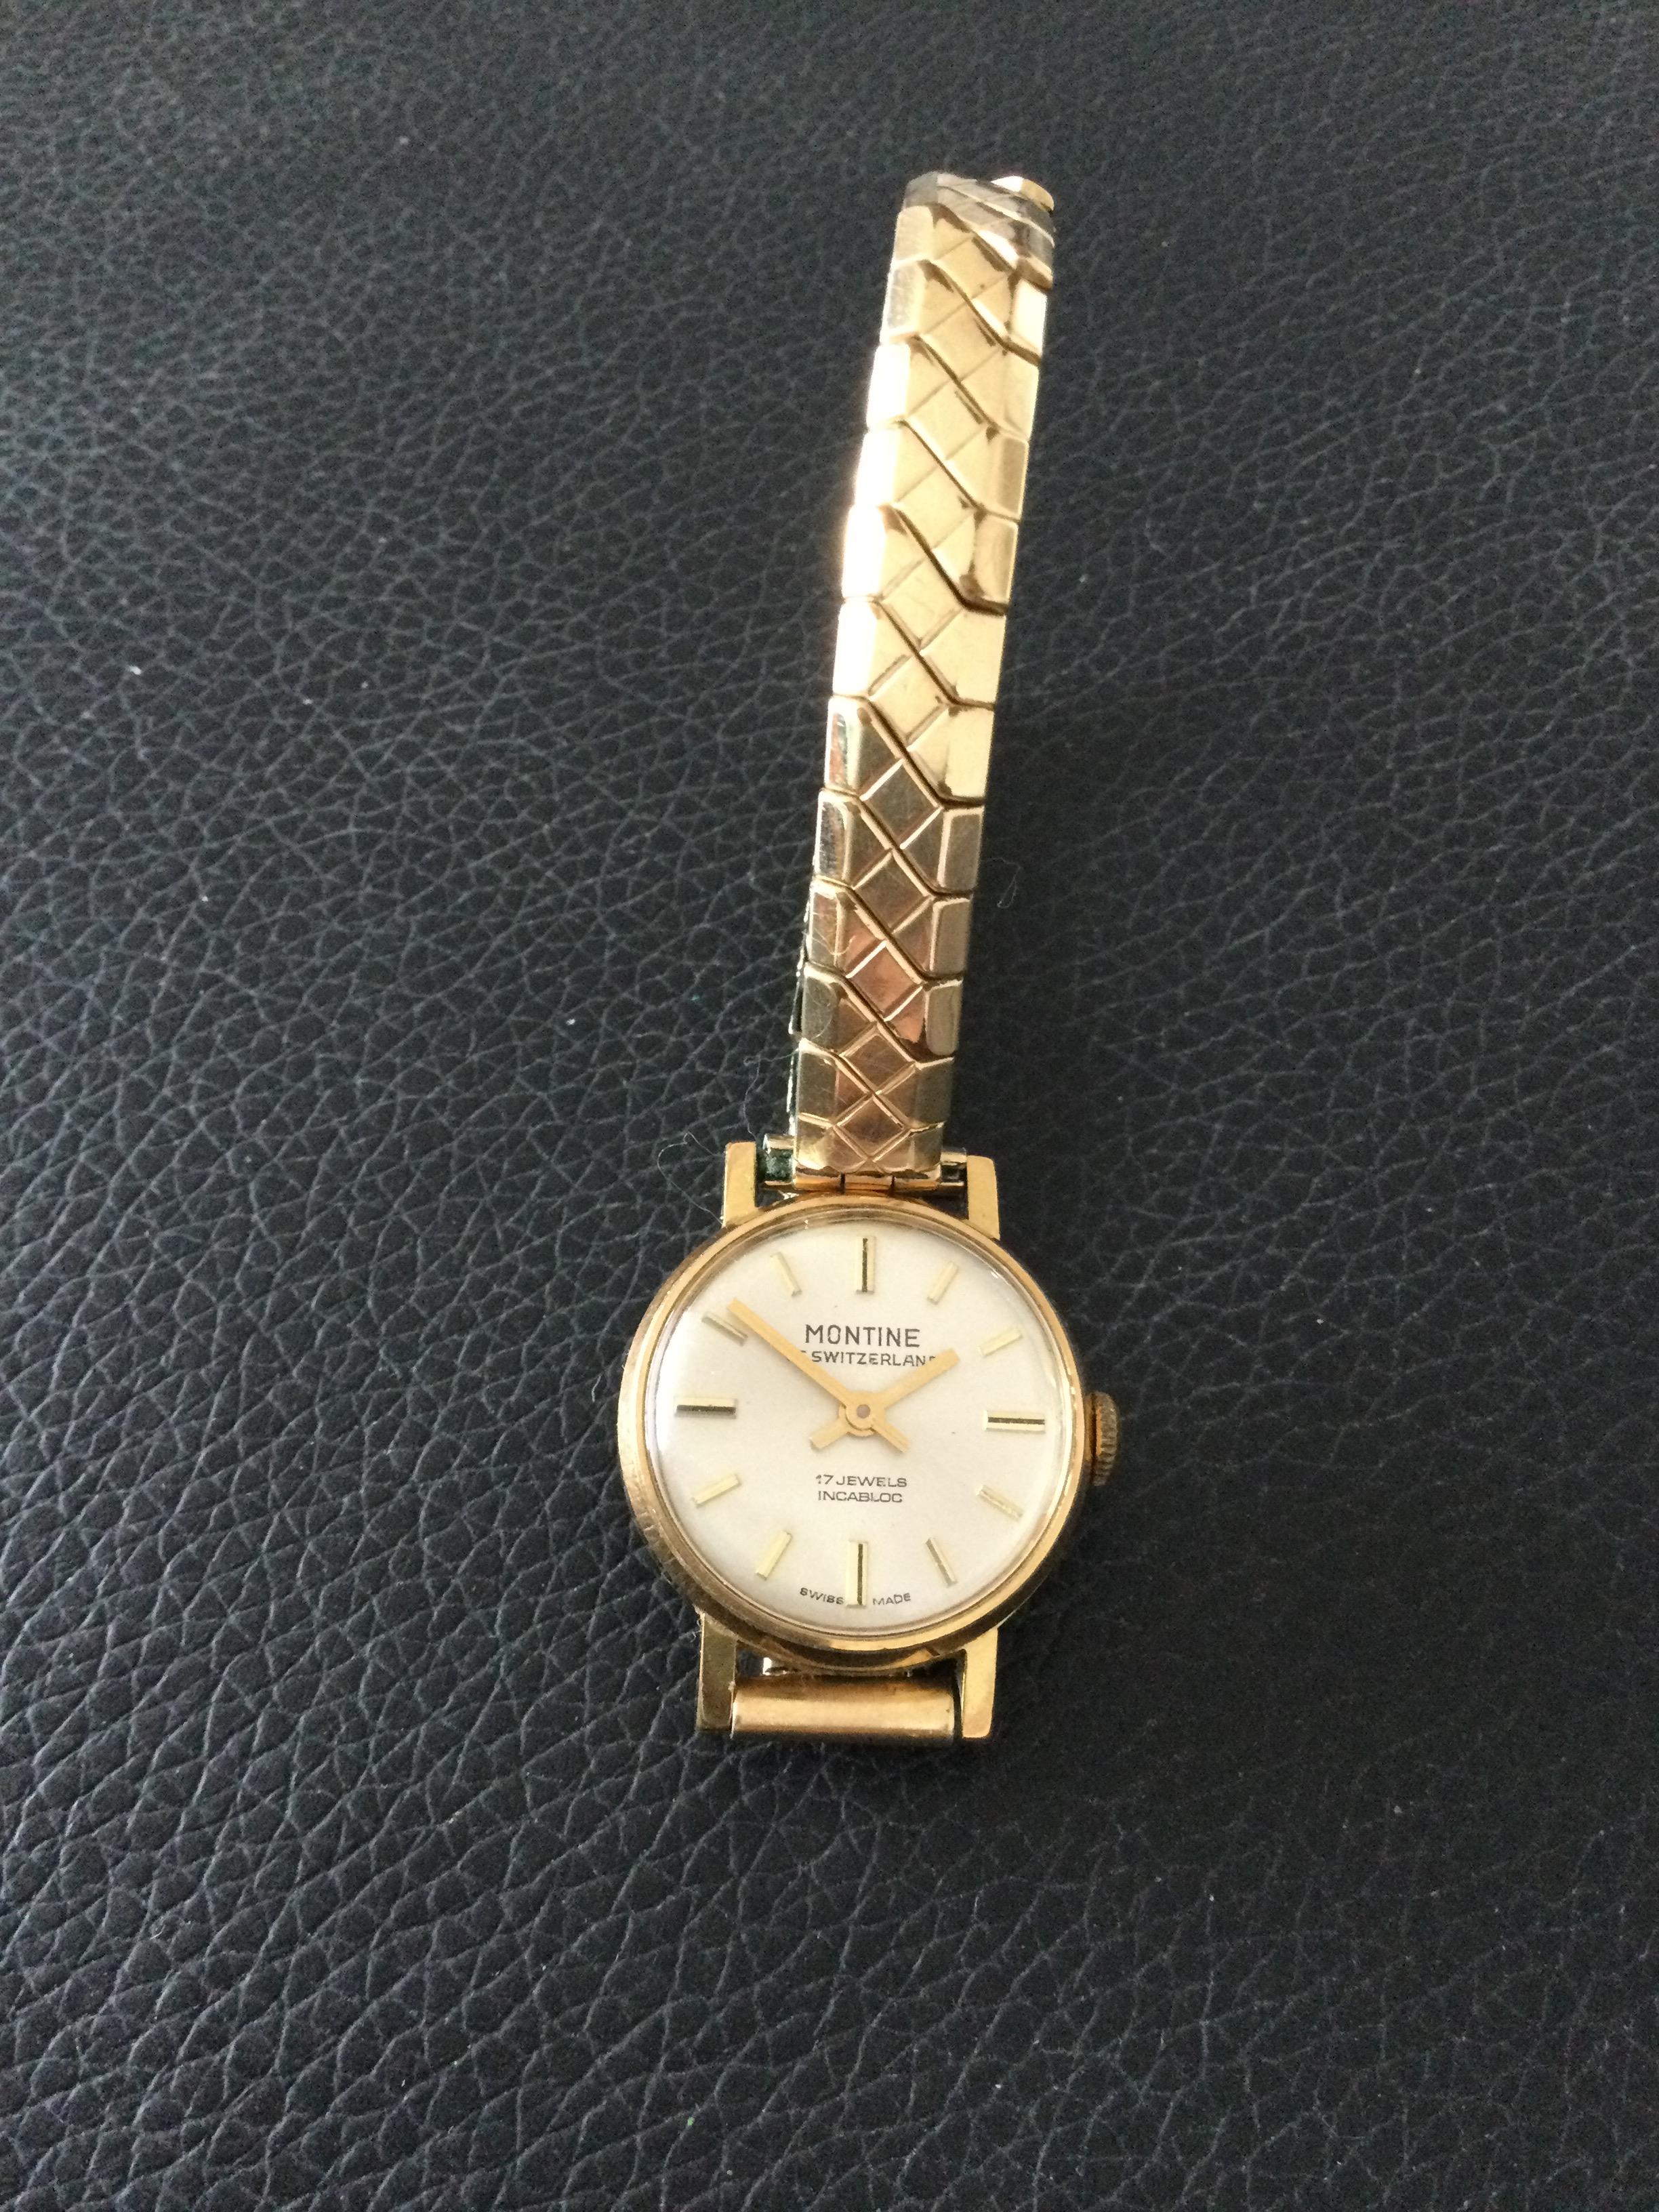 Montine Gold Plated Swiss Ladies Wristwatch (GS24) A Beautiful Manual Wind Swiss version of a